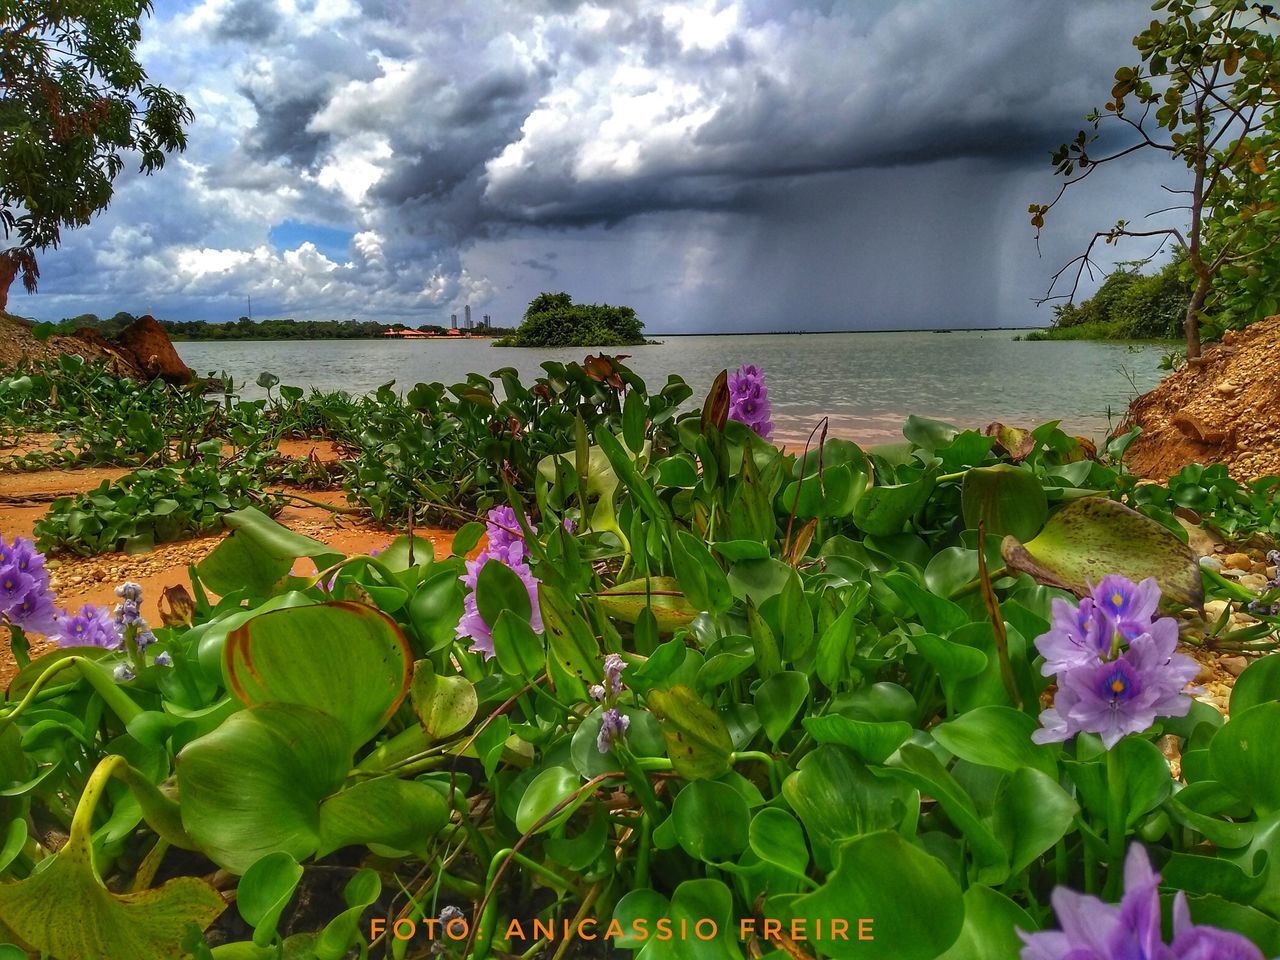 flower, beauty in nature, nature, growth, plant, cloud - sky, sky, leaf, fragility, water, scenics, outdoors, no people, petal, tranquility, freshness, day, green color, sea, tranquil scene, flower head, blooming, tree, horizon over water, close-up